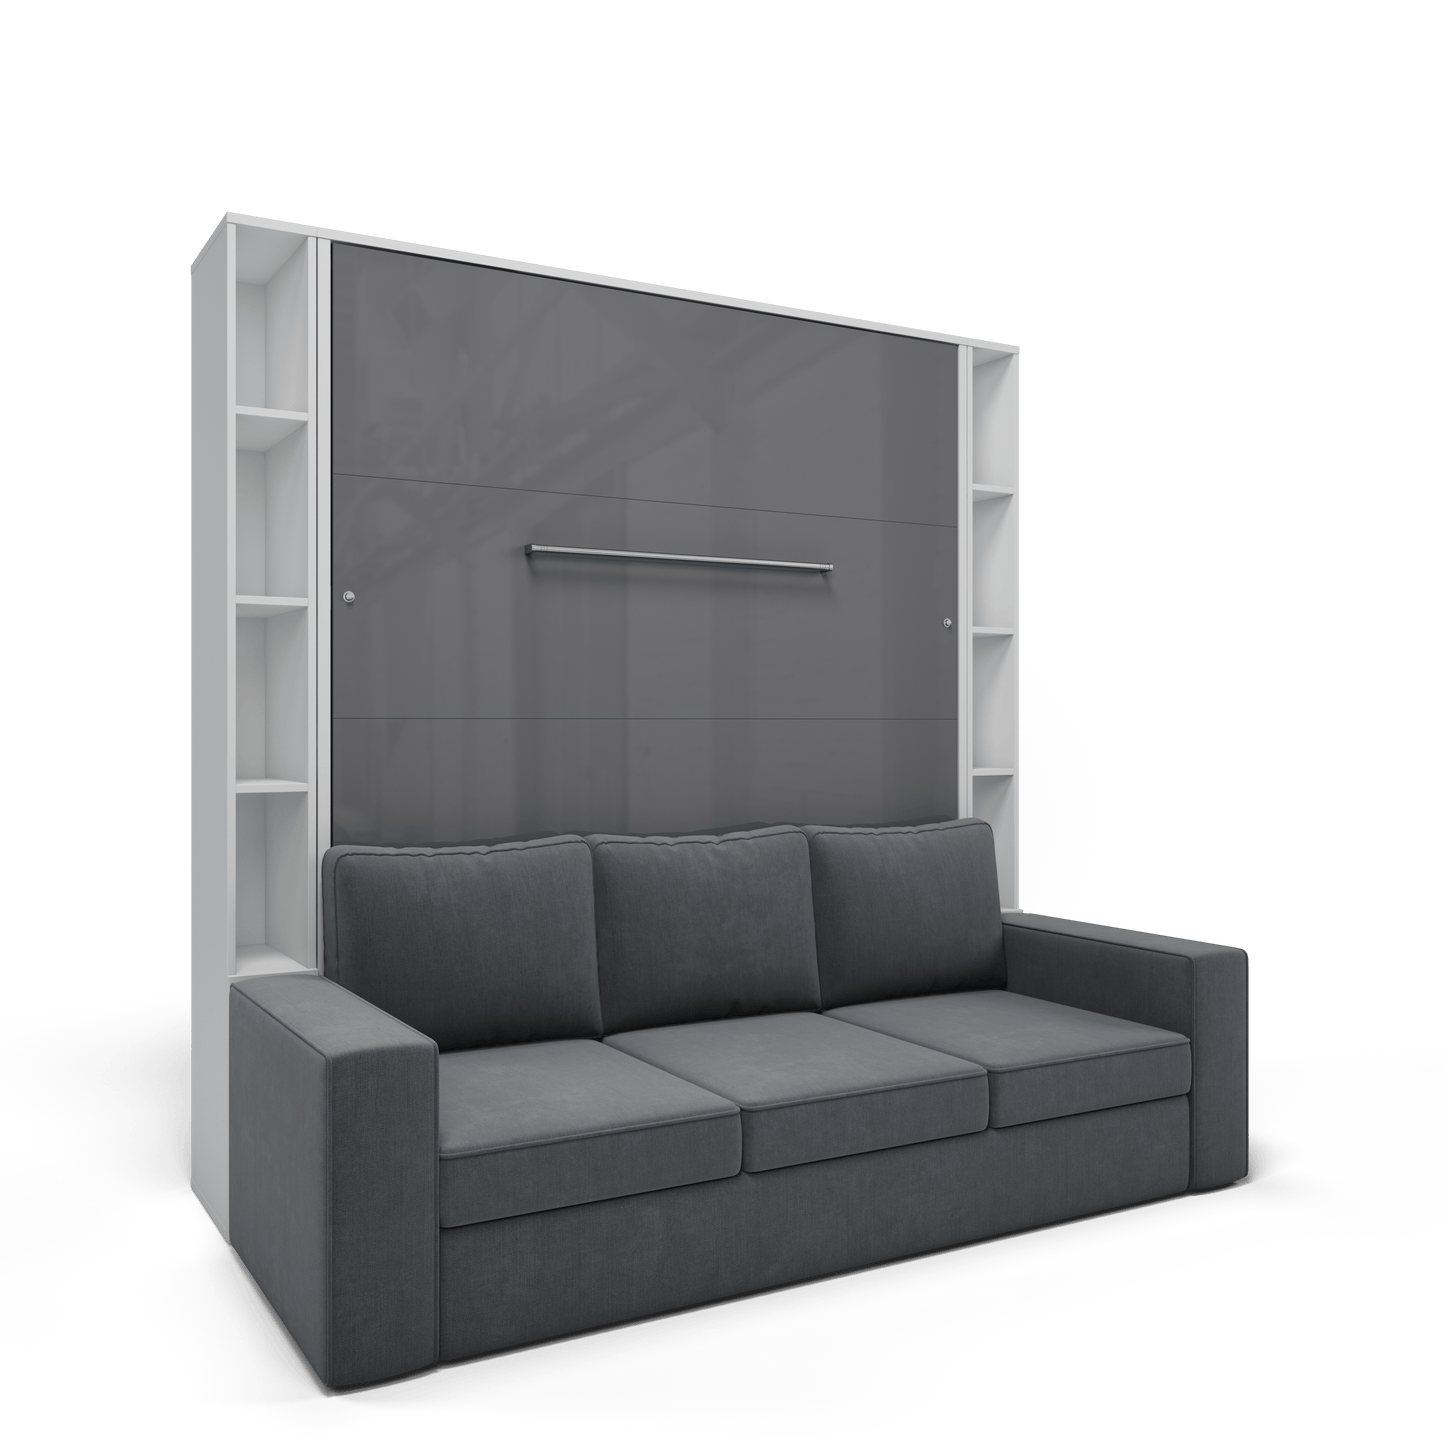 Maxima House Maxima House Vertical European Queen size Murphy Bed Invento with a Sofa and two Cabinets White/Grey + Grey IN014/23WG-G